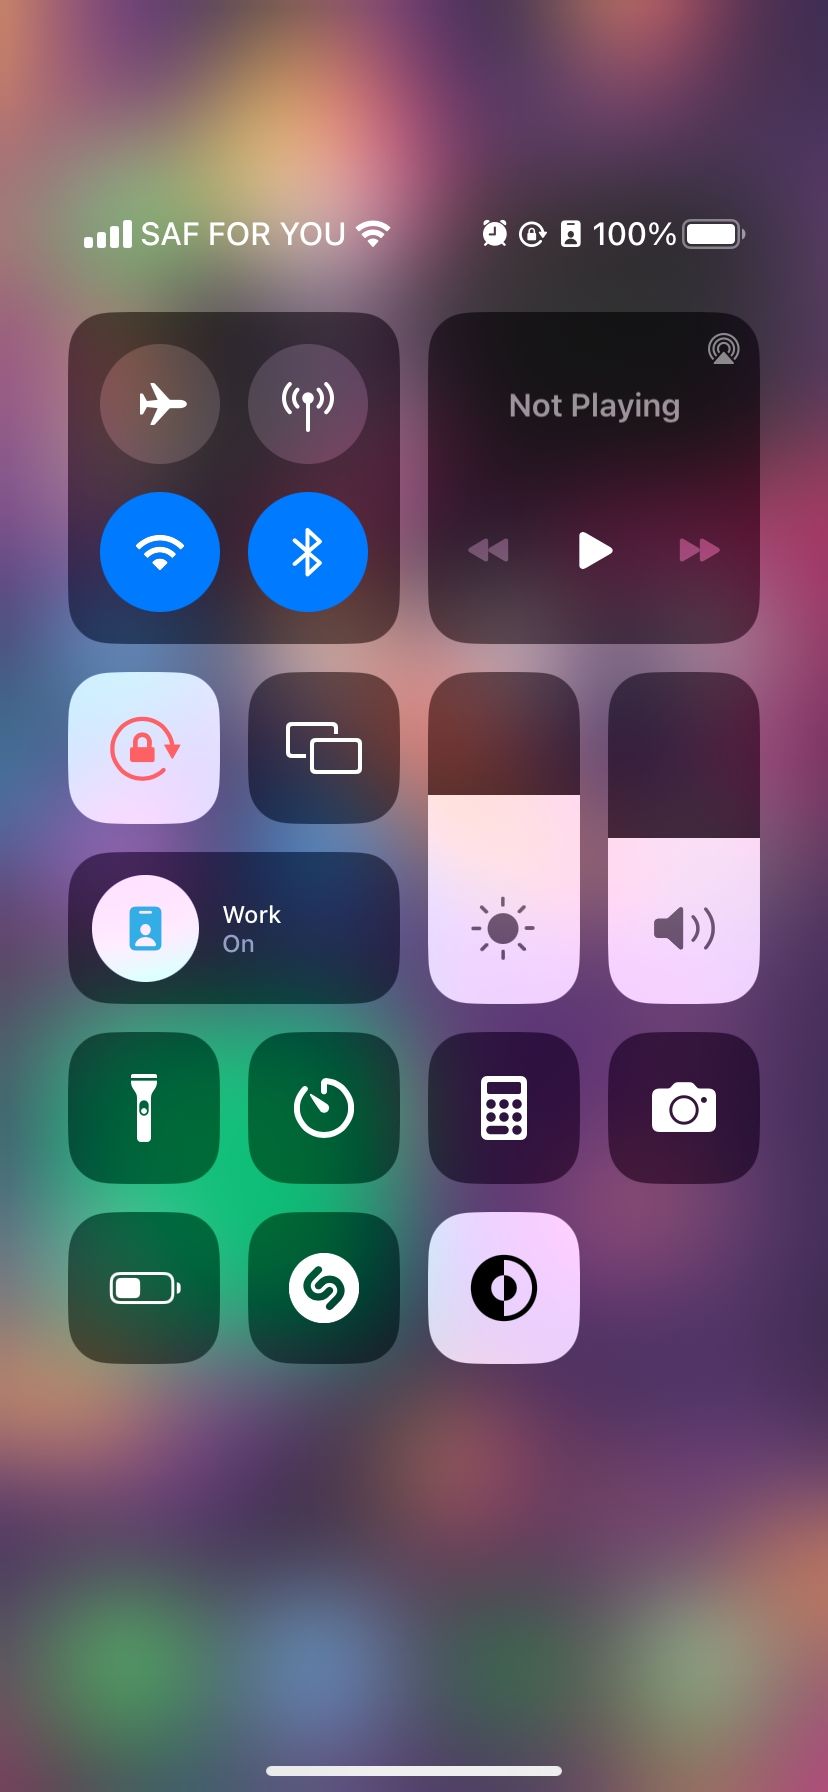 Control Center in iOS with Airplane Mode disabled